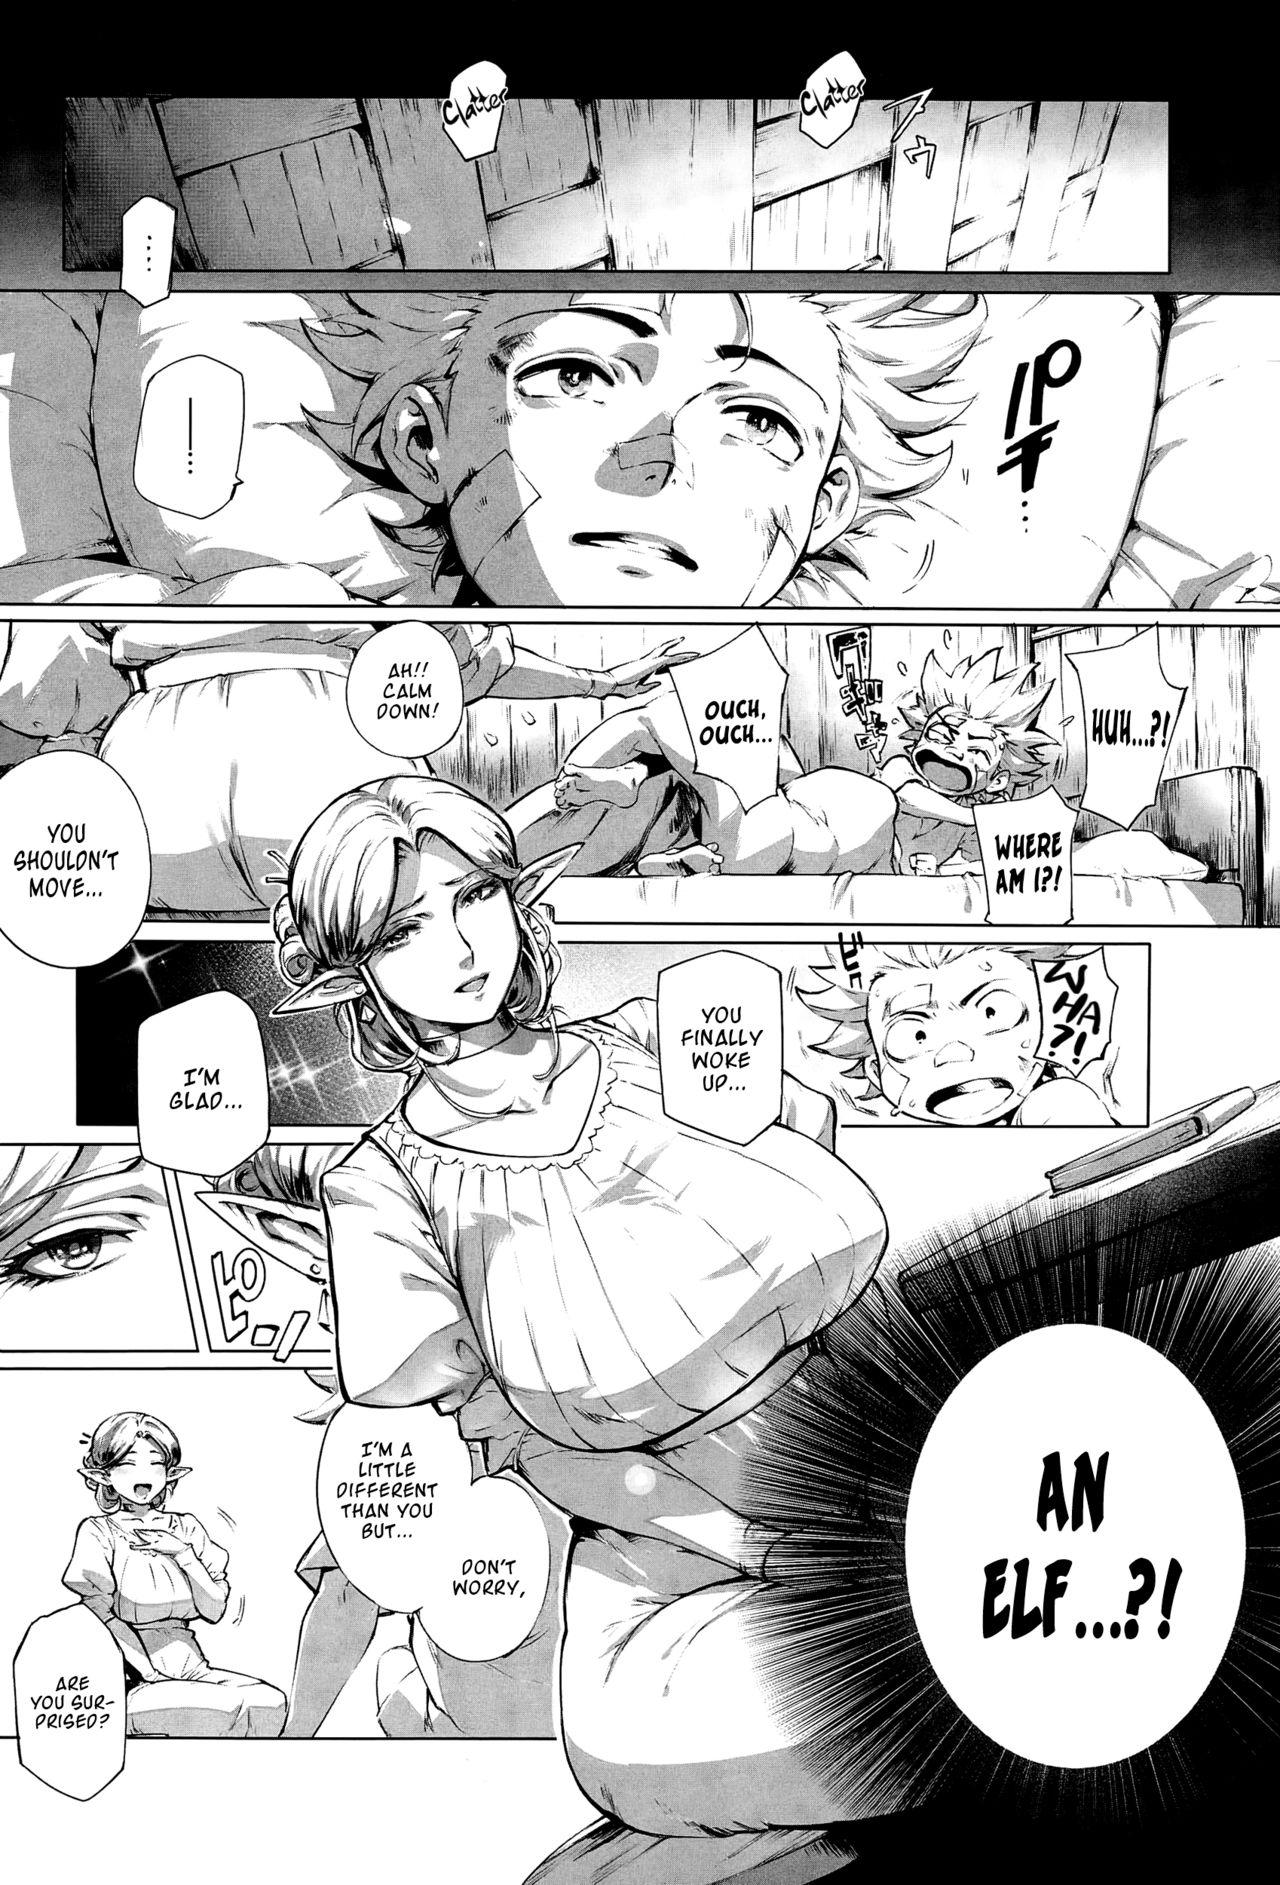 Puta Koko ga Tanetsuke Frontier | This Is The Mating Frontier! Ch. 1-2 Heels - Page 2